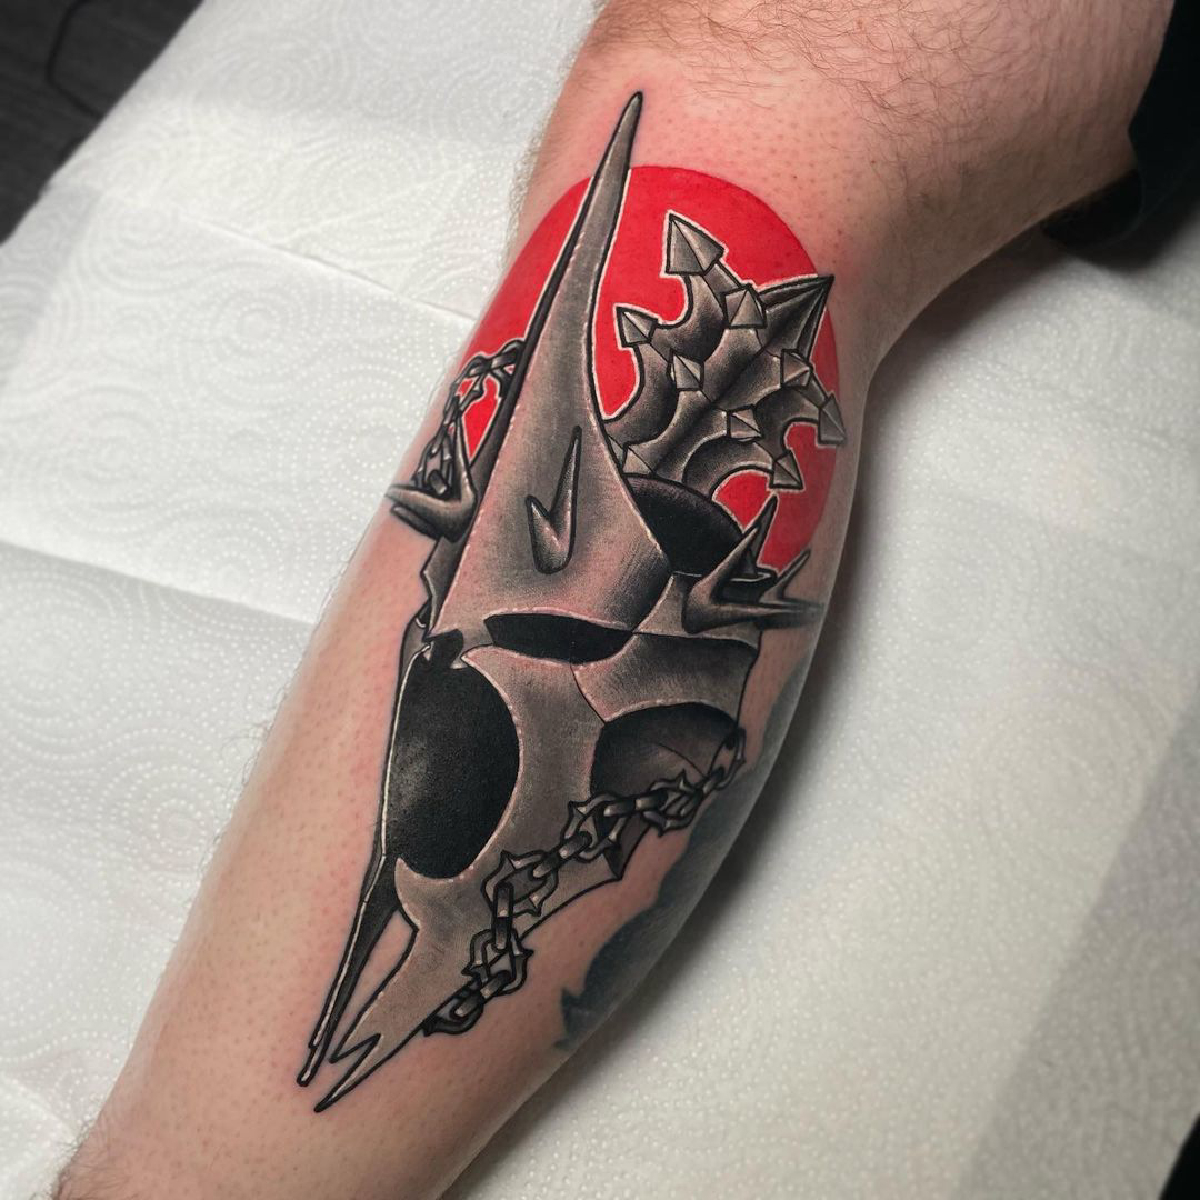 A neo-traditional tattoo by Peter Murray showing the Witch-king's helmet and flail on a red circle.